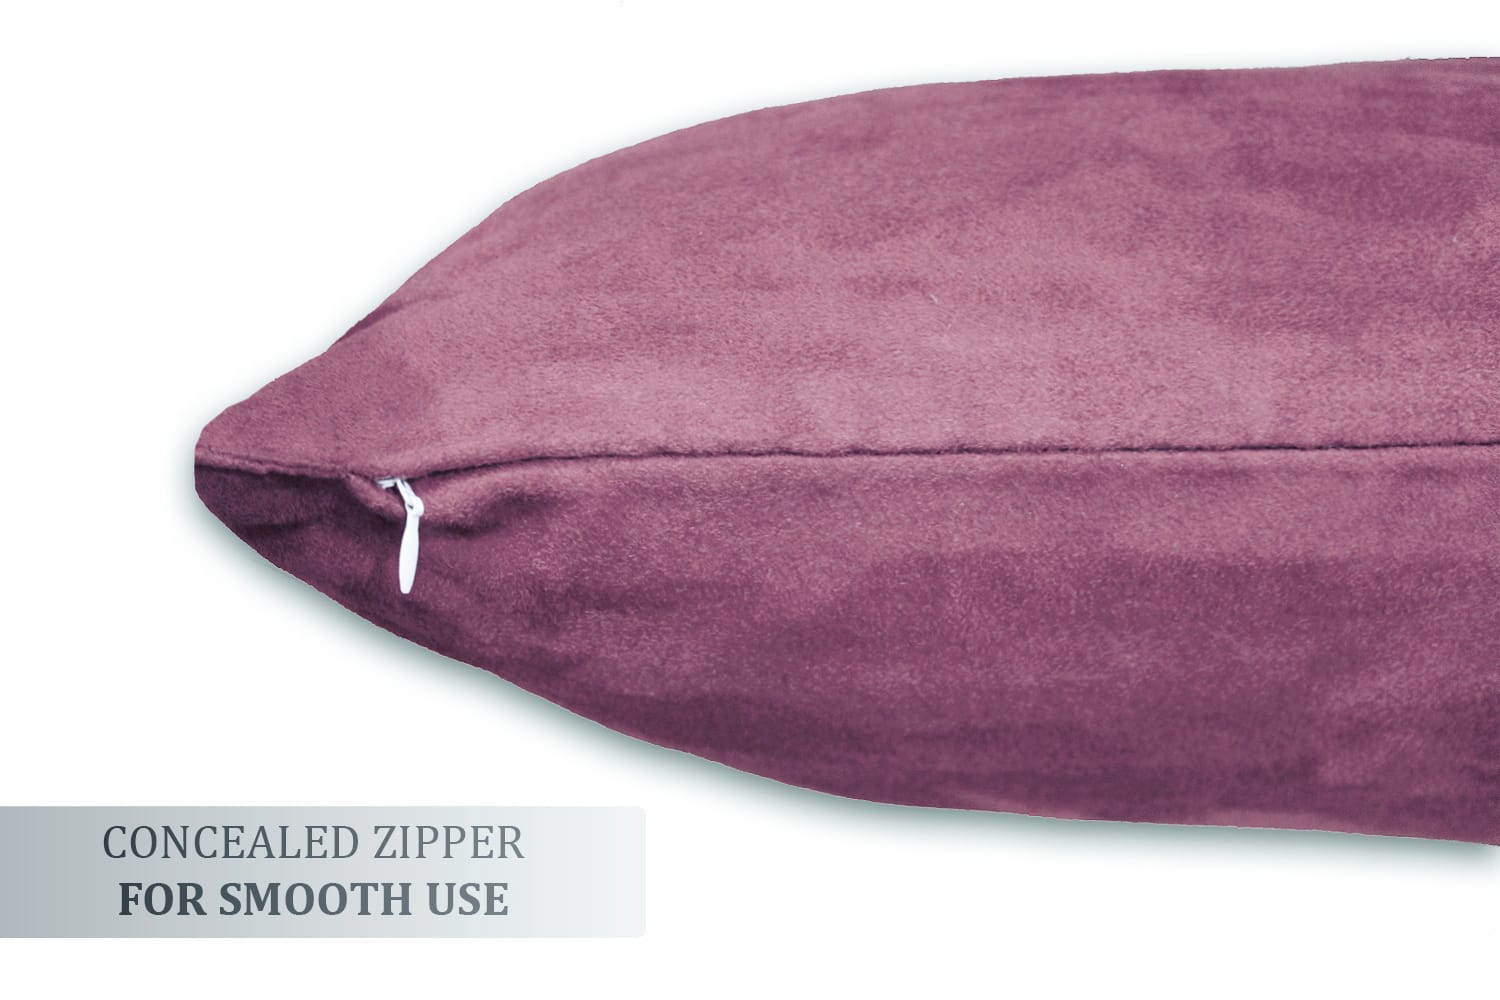 Luxurious Microfiber Suede Velvet Cushion Cover Set in Purple online in India